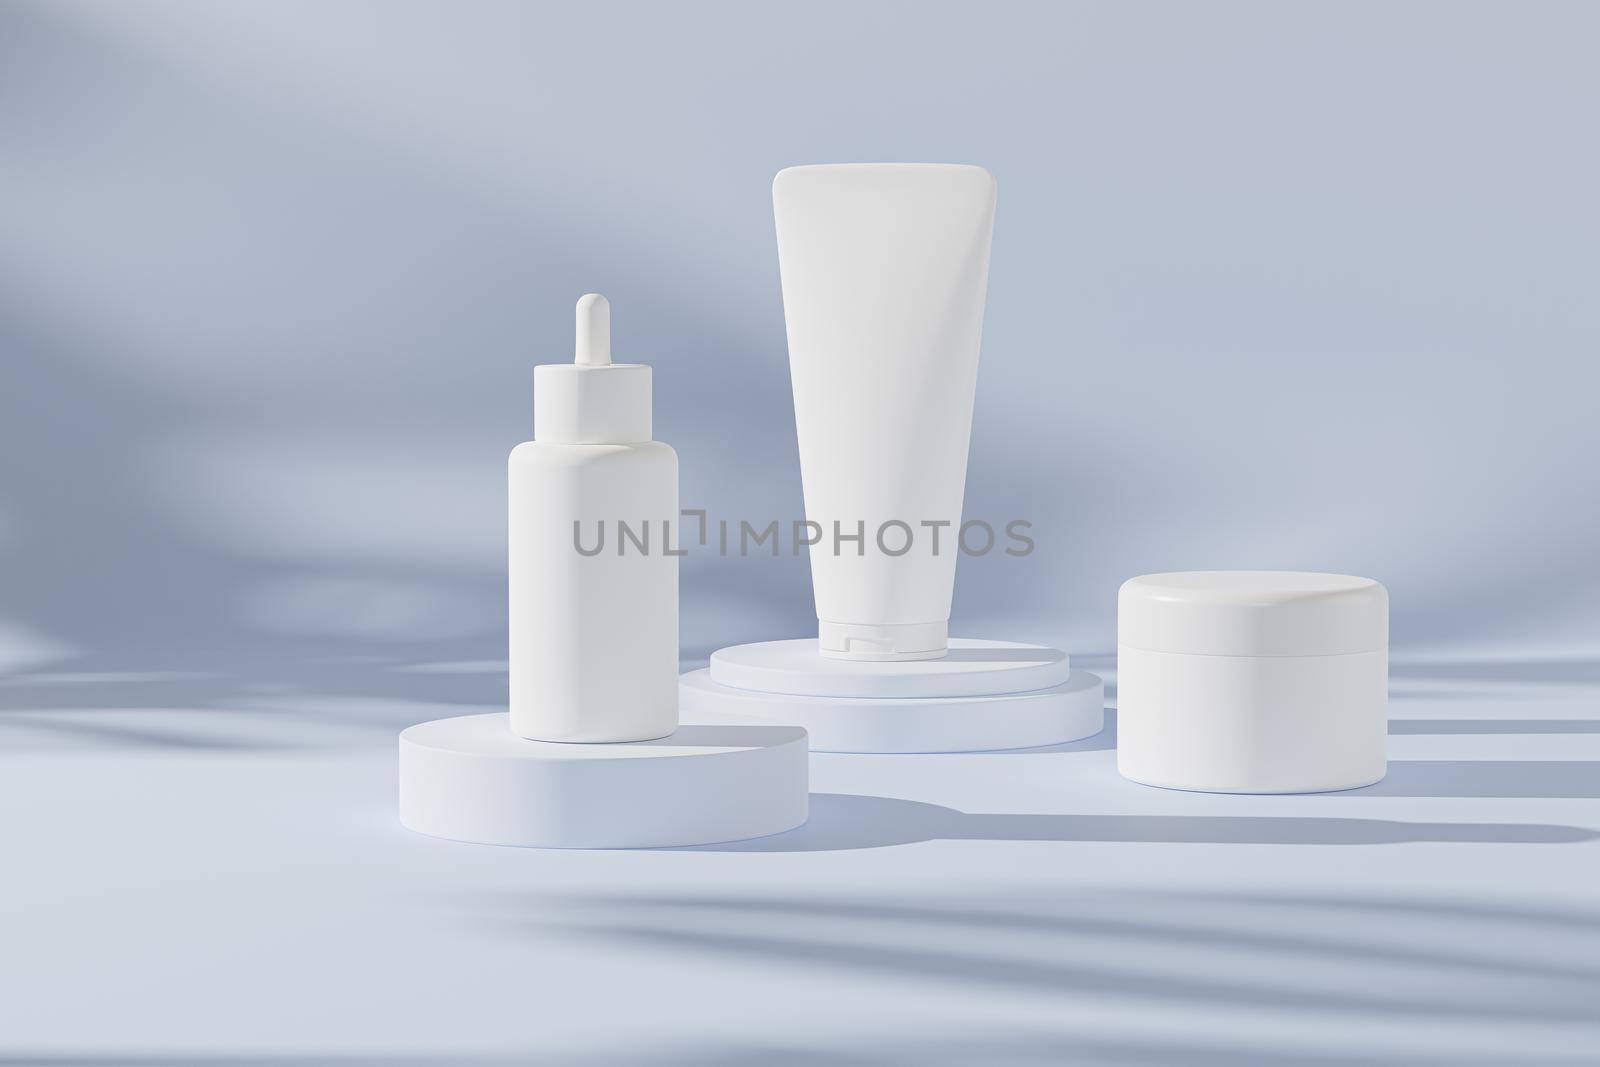 Mockup dropper bottle, lotion tube and cream jar for cosmetics products or advertising on neutral blue background, 3d illustration render by Frostroomhead